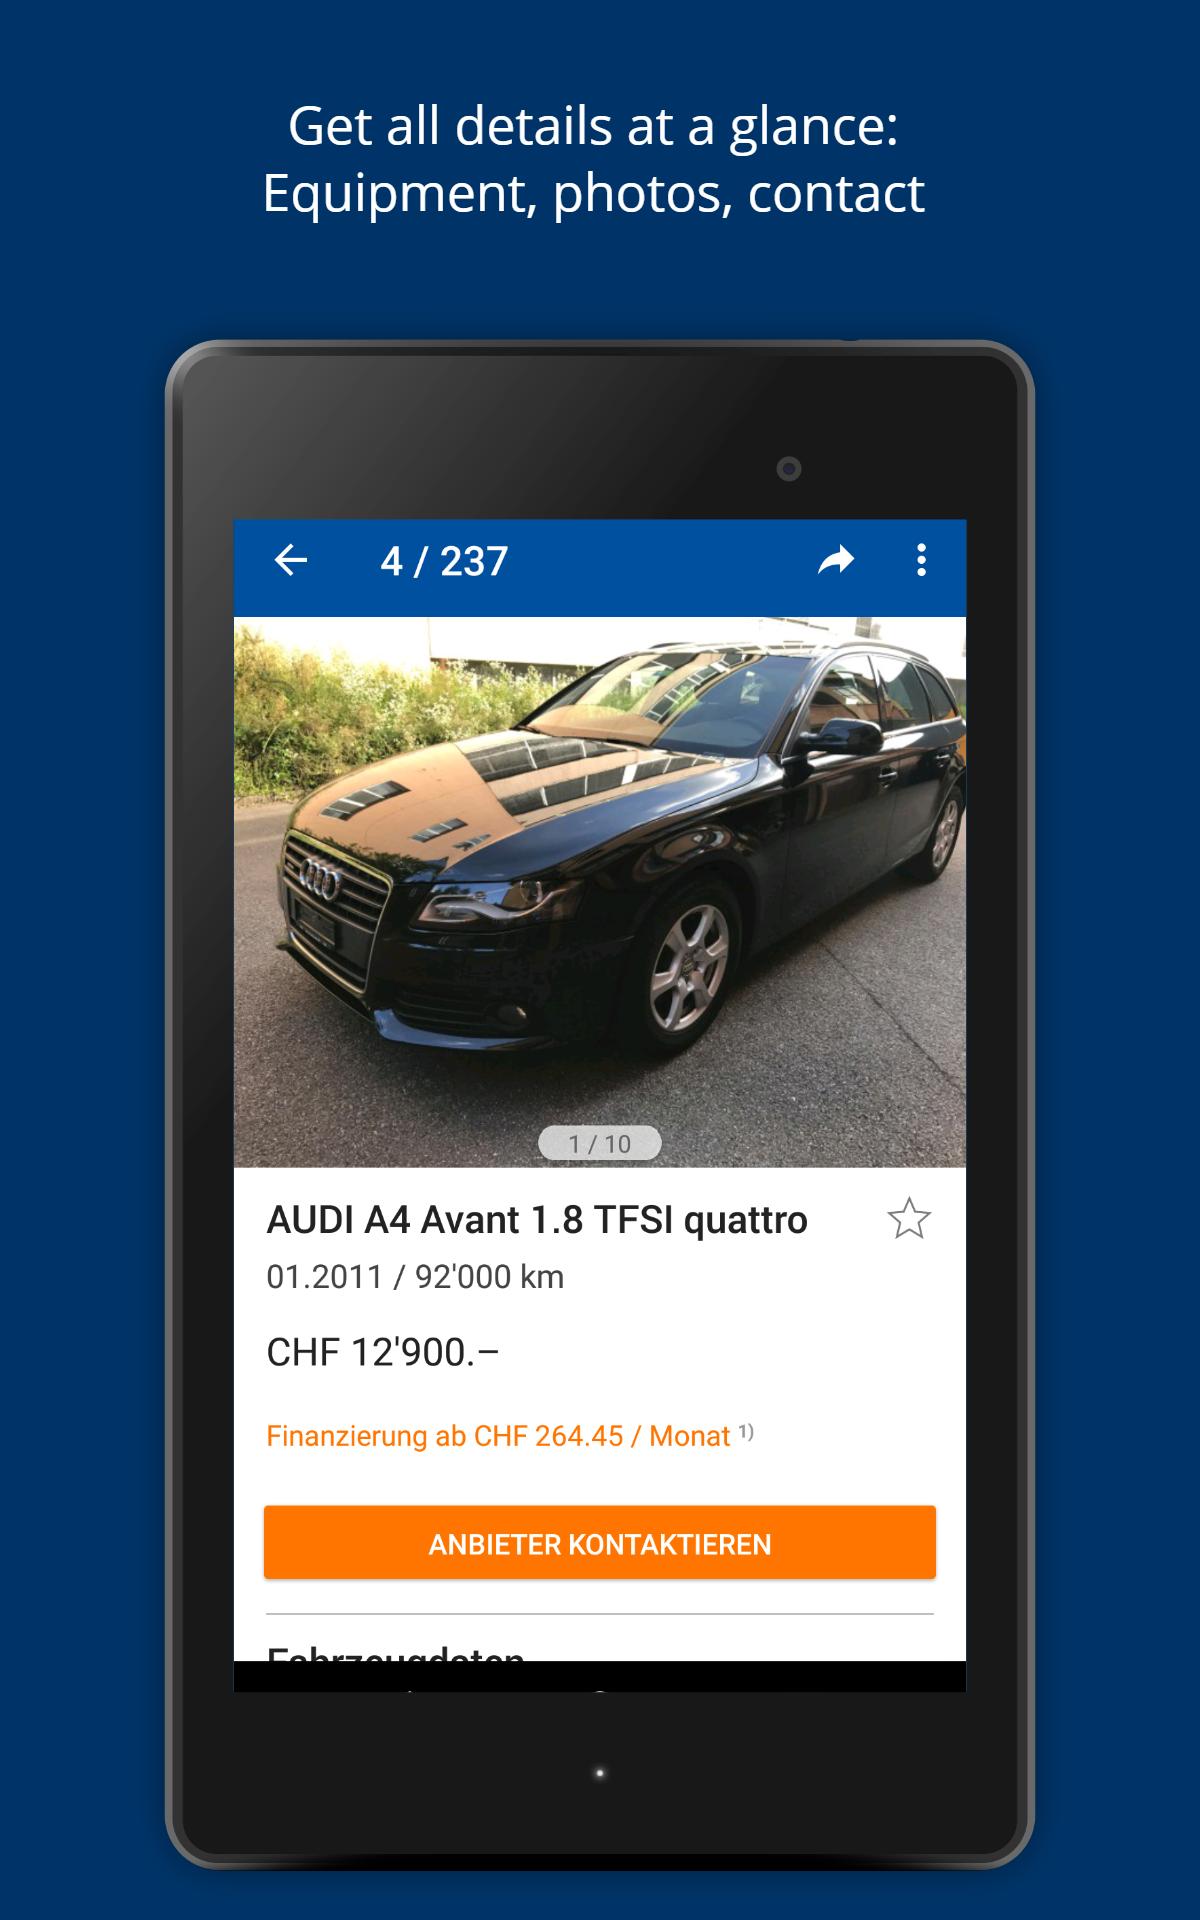 AutoScout24 Switzerland – Find your new car 4.0.0 Screenshot 17